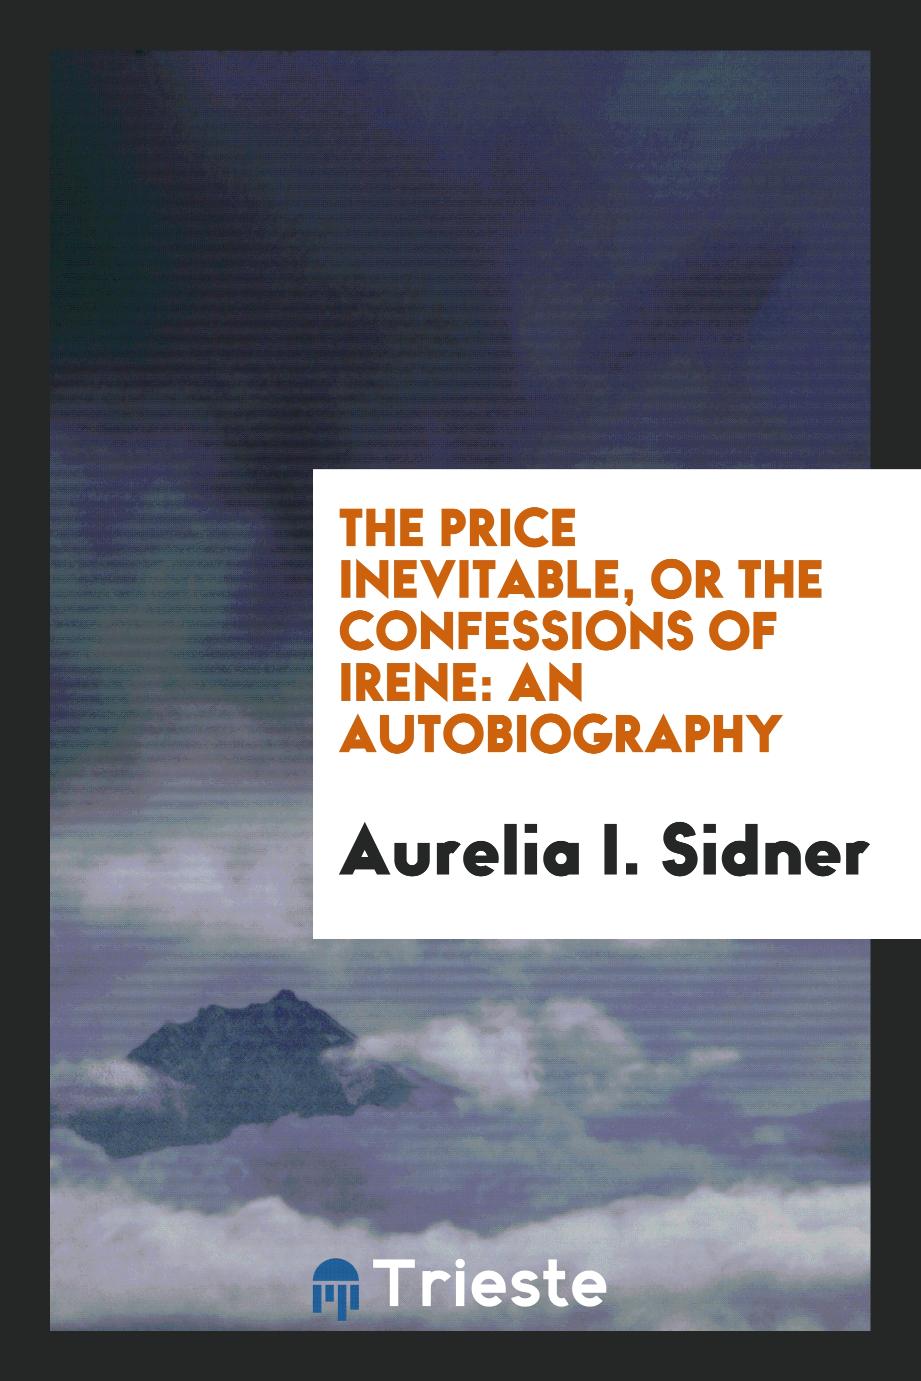 The Price Inevitable, or the Confessions of Irene: An Autobiography